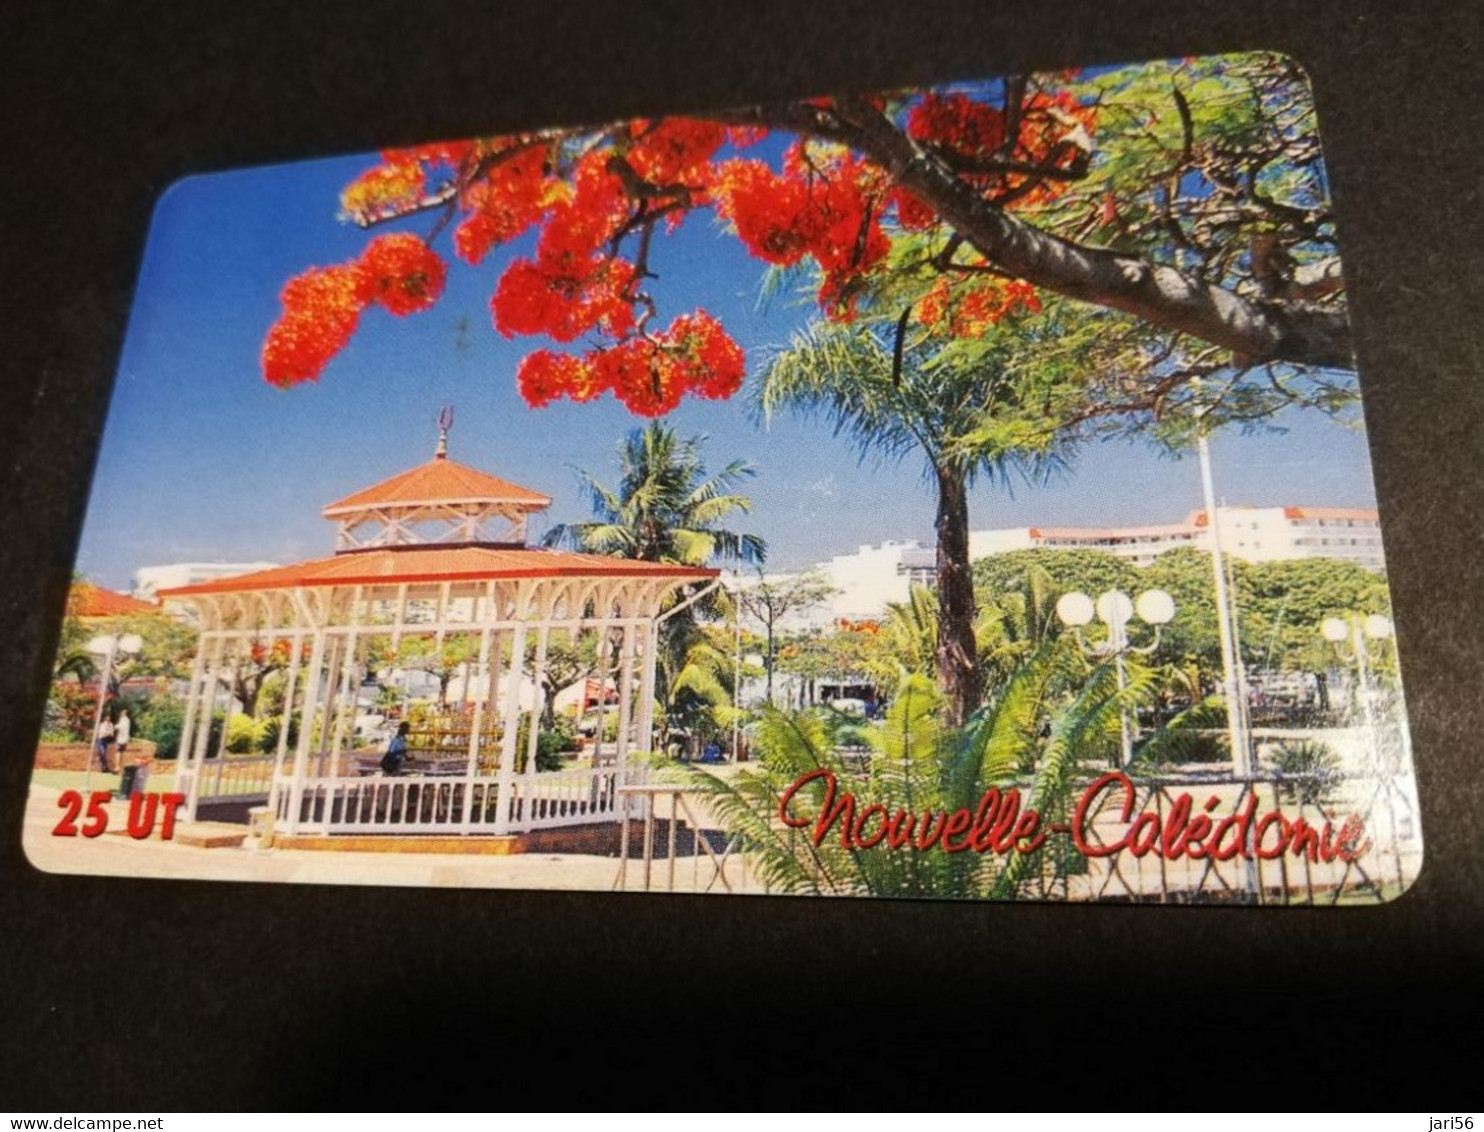 NOUVELLE CALEDONIA  CHIP CARD 25  UNITS  KIOSQUE A MUSIC AND FLOWERS IN TREE       ** 4195 ** - Neukaledonien